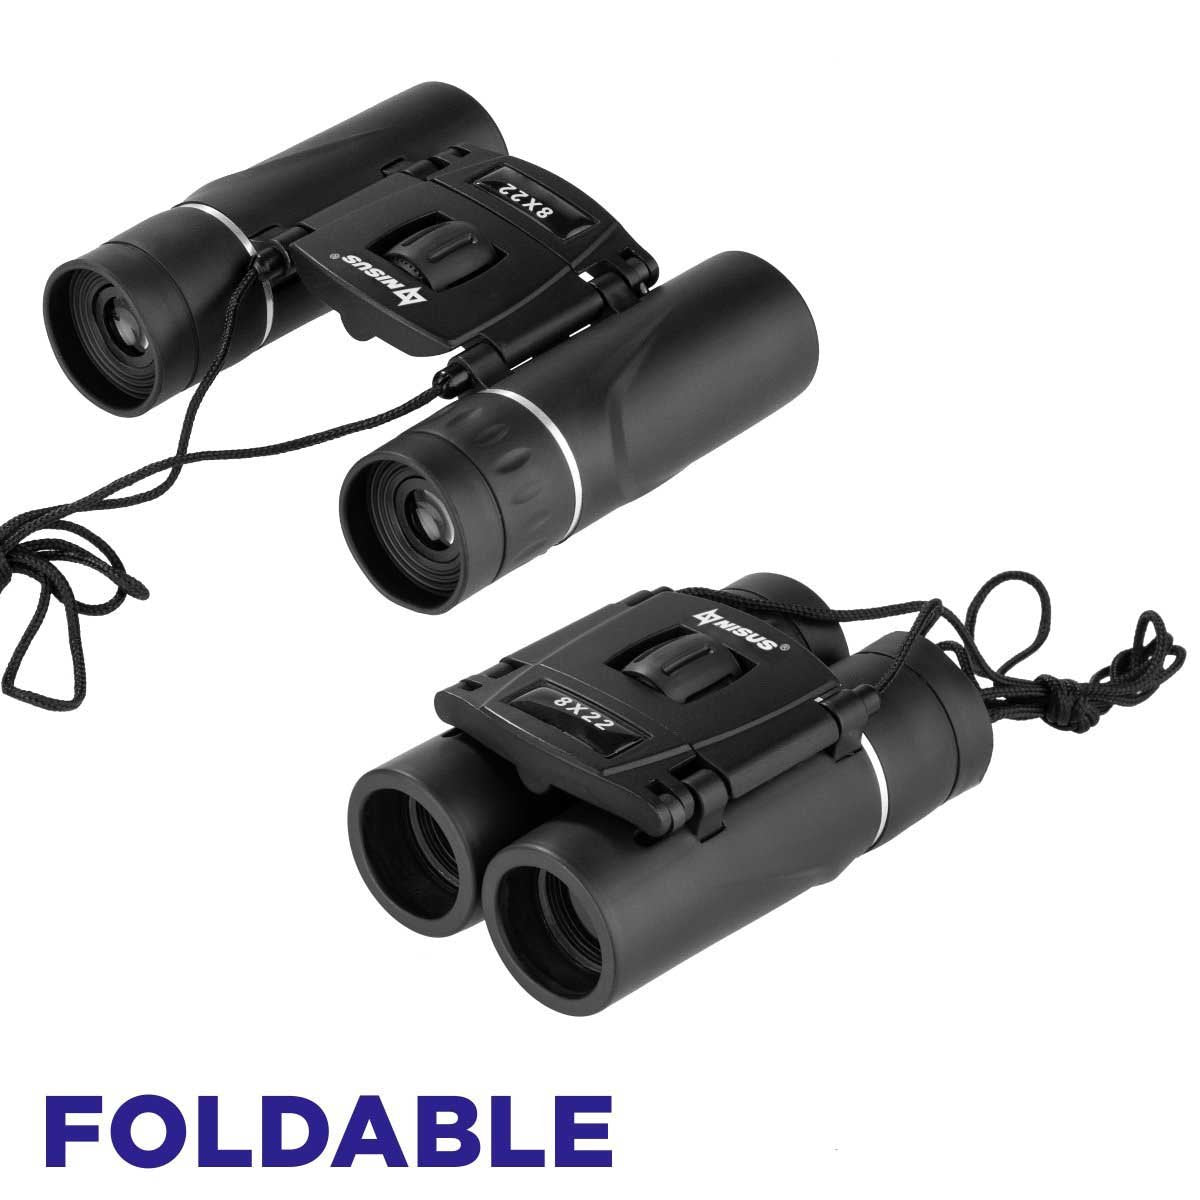 8x22 Compact Lightweight Binocular for Backpacking is foldable and compact